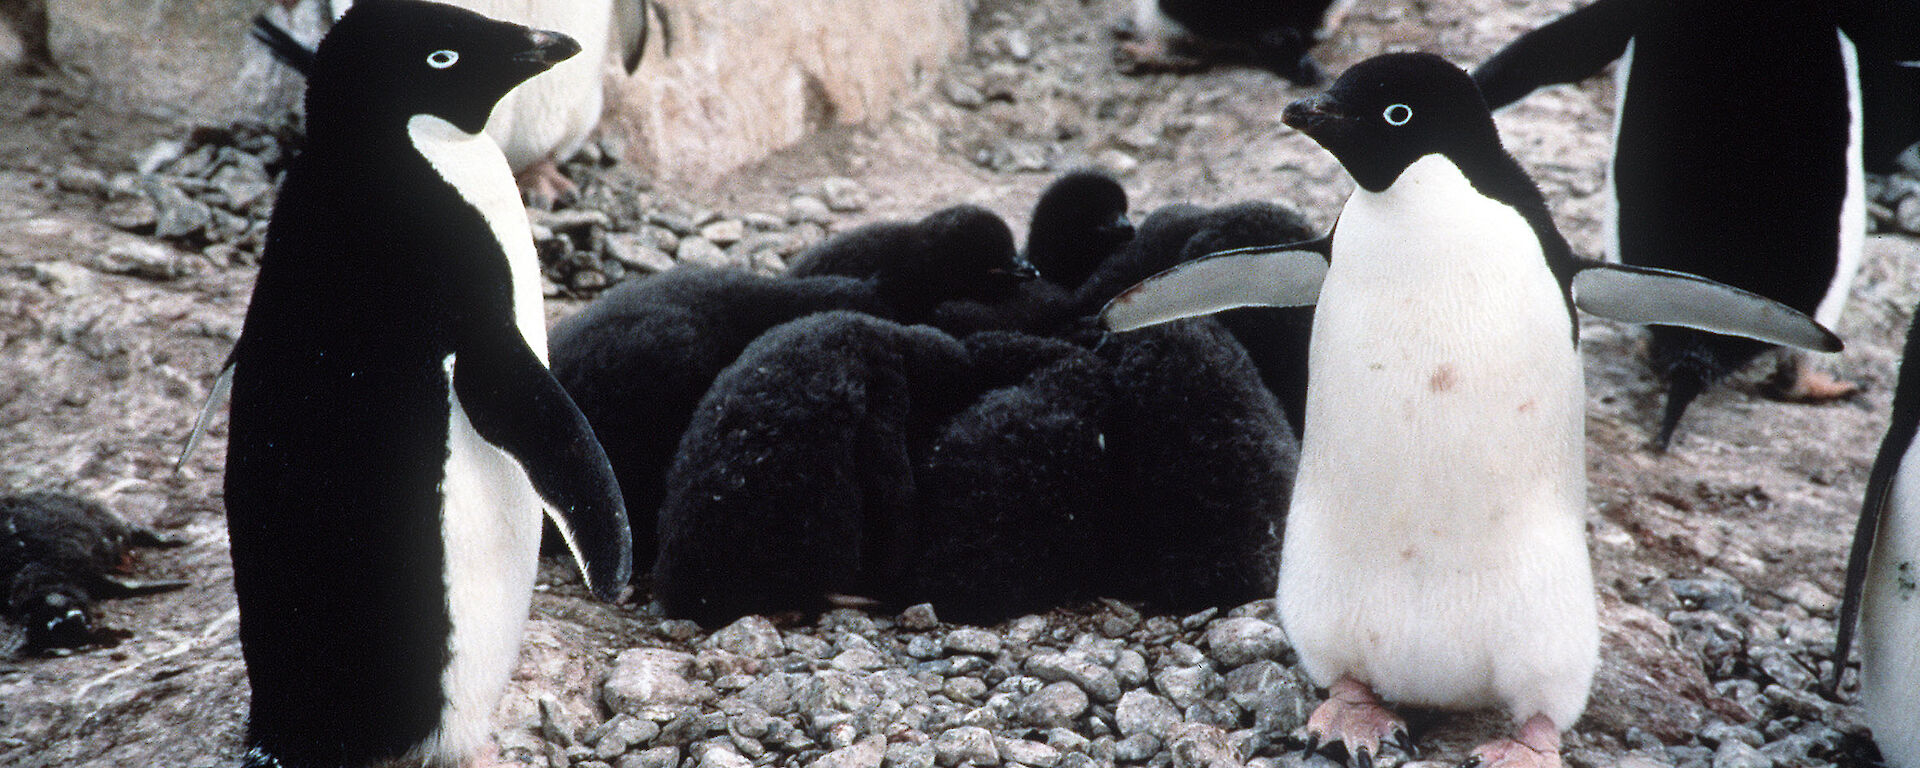 Adelie penguins and chick creche